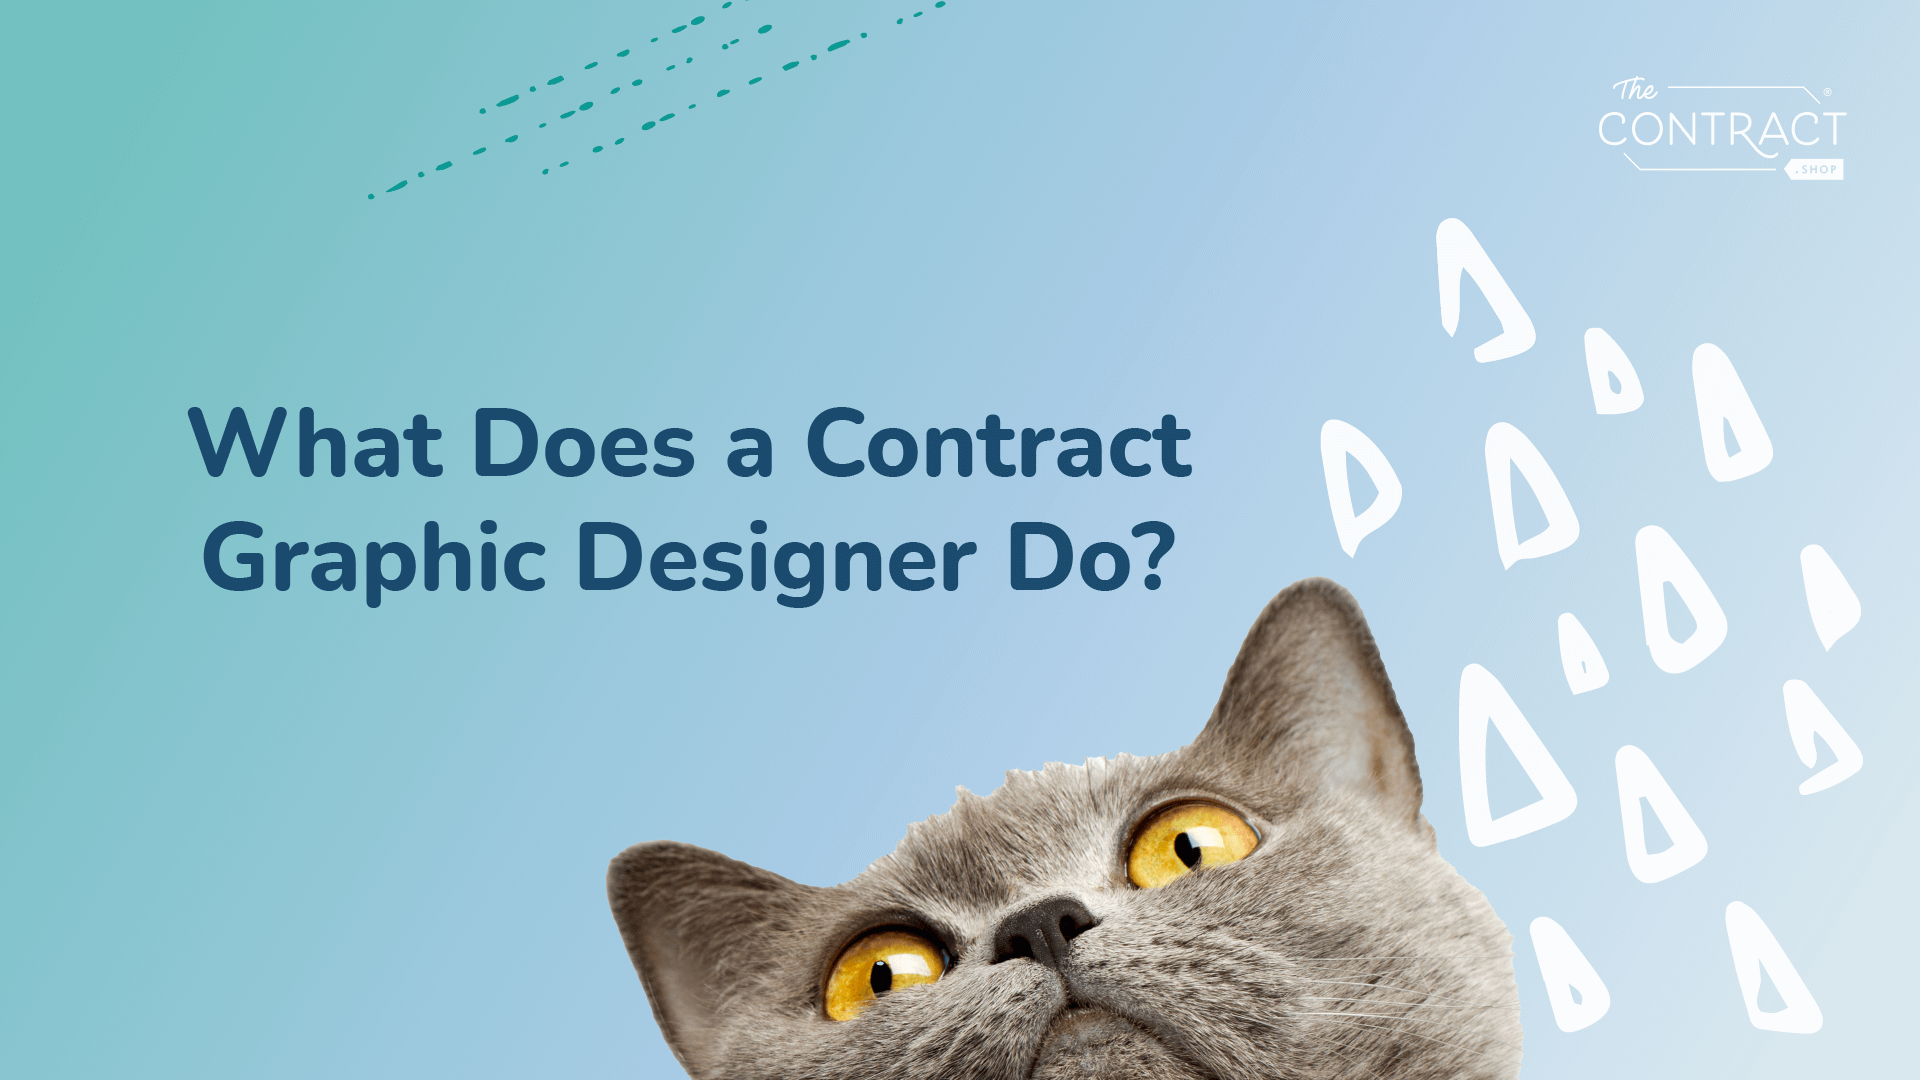 What Does a Contract Graphic Designer Do?